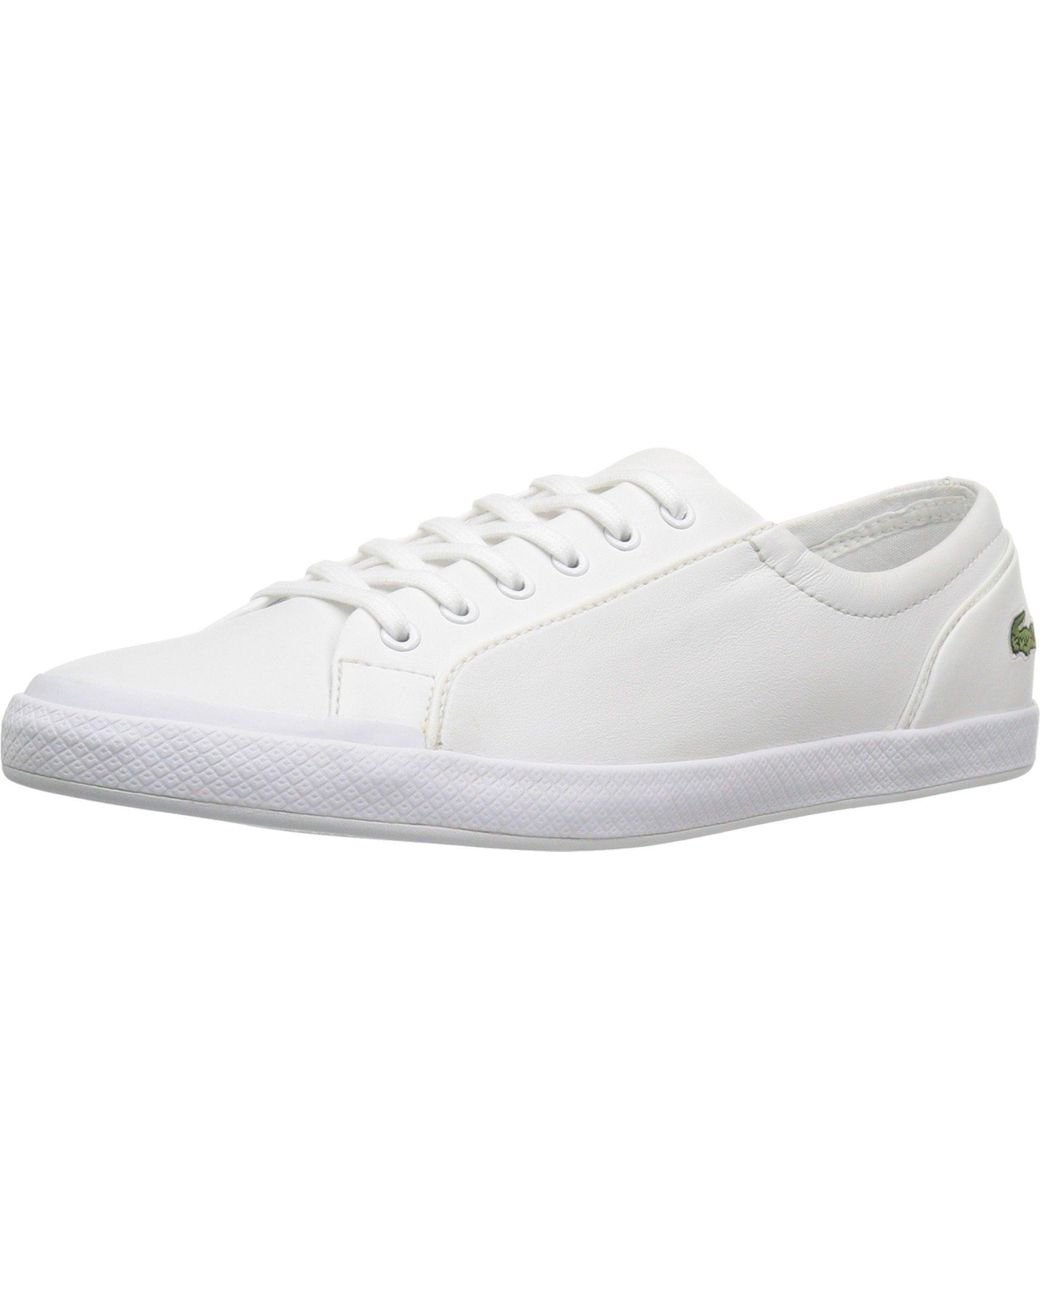 Lacoste Lancelle Bl 1 in White | Lyst